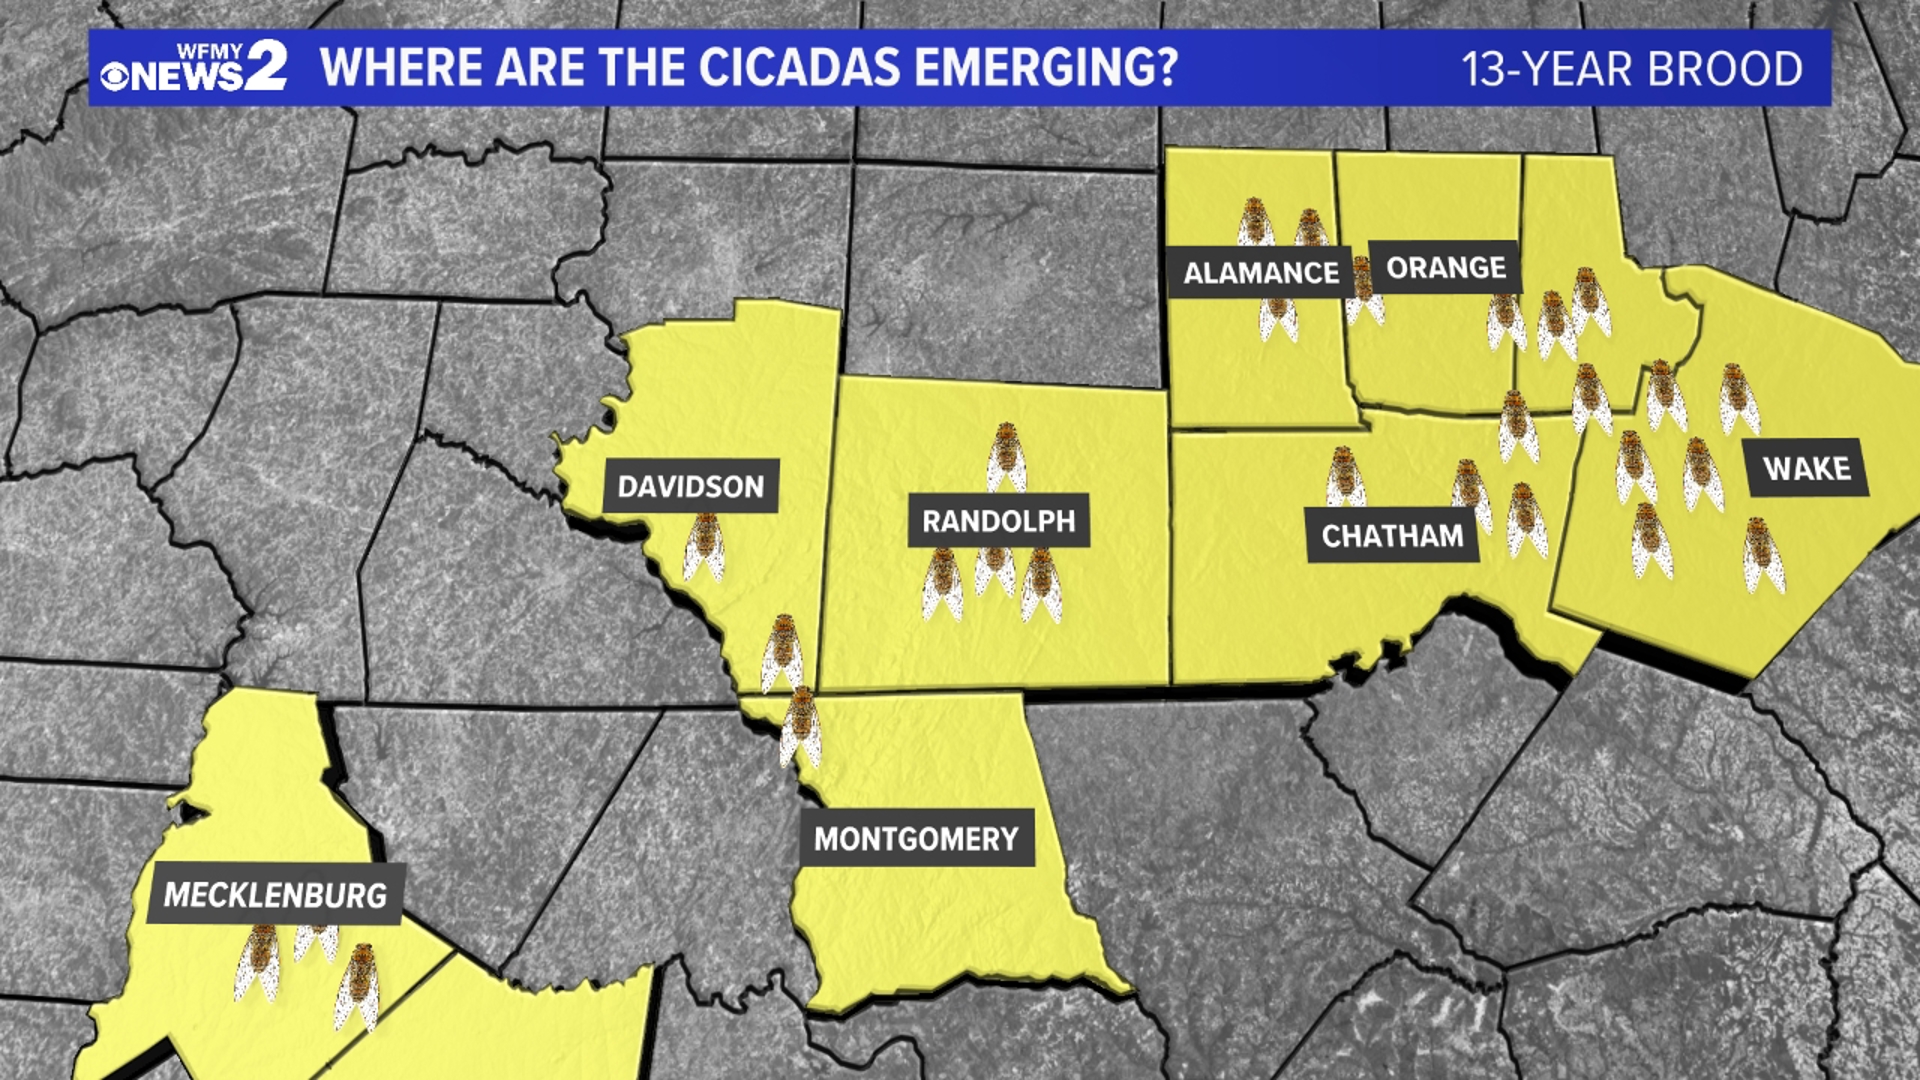 After a lot of talk, the cicadas are finally here - but only in parts of the Carolinas. Tim Buckley has an update.